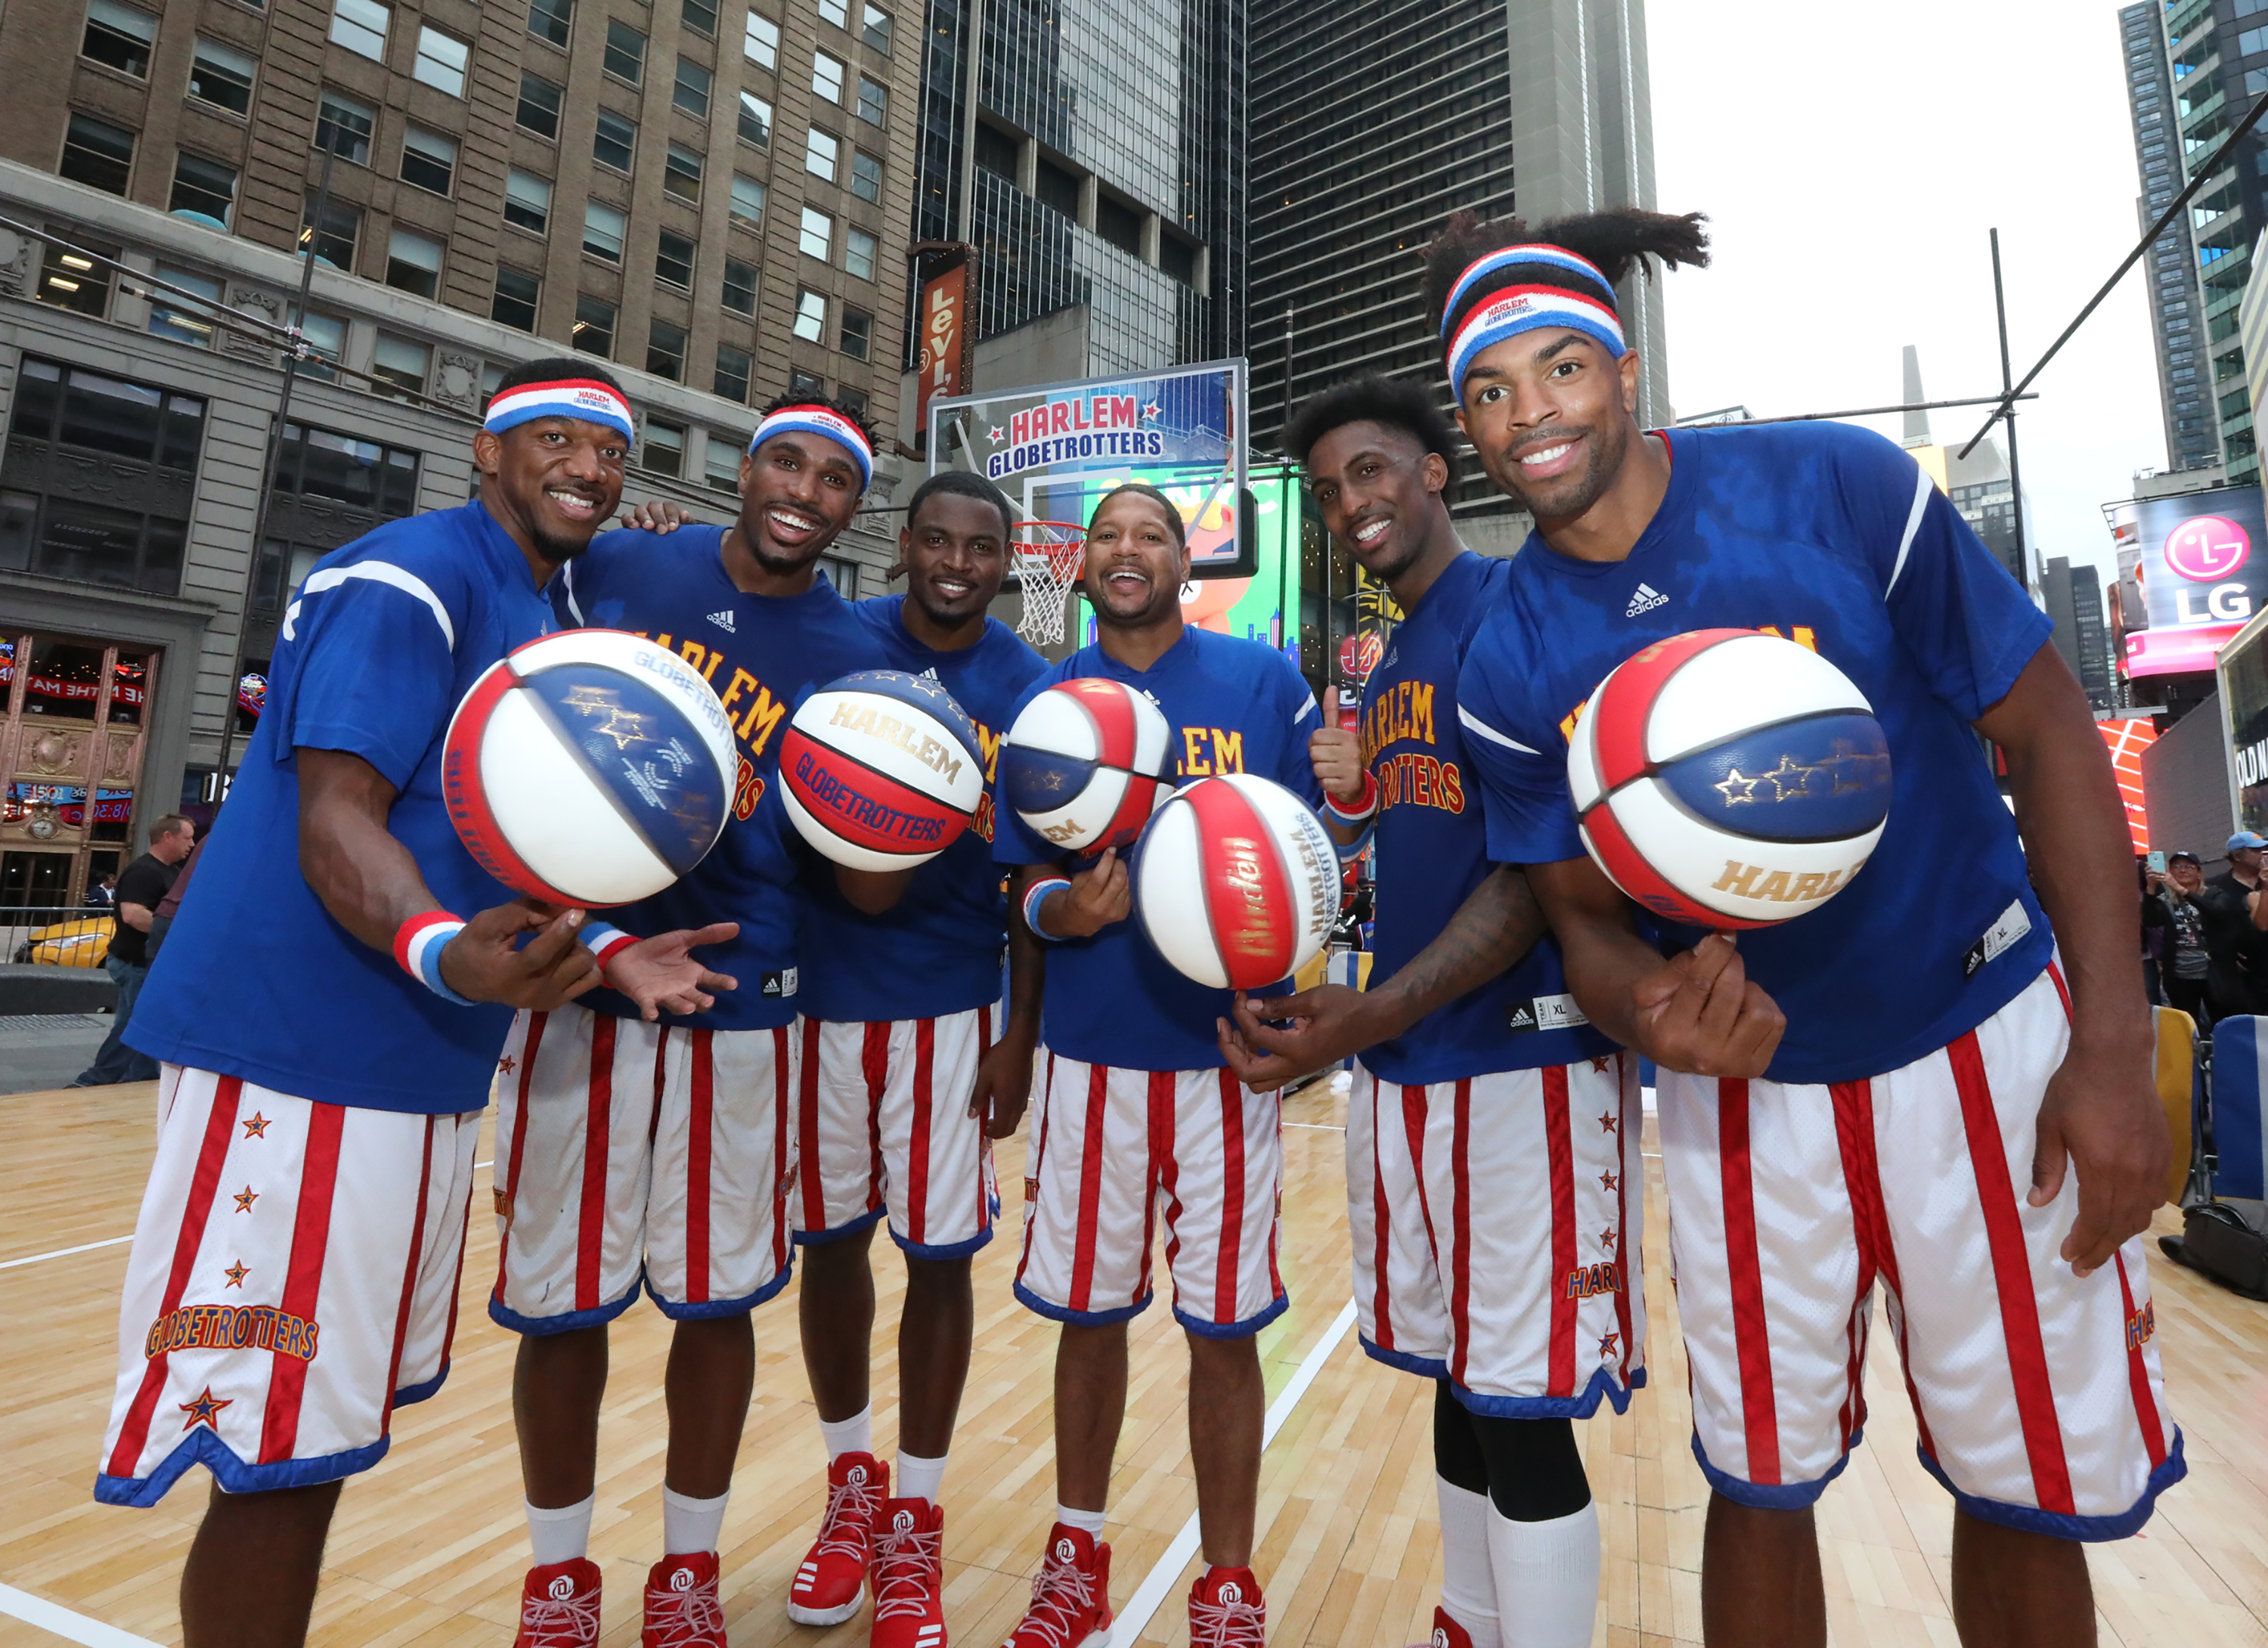 The Harlem Globetrotters want the NBA to make them part of the